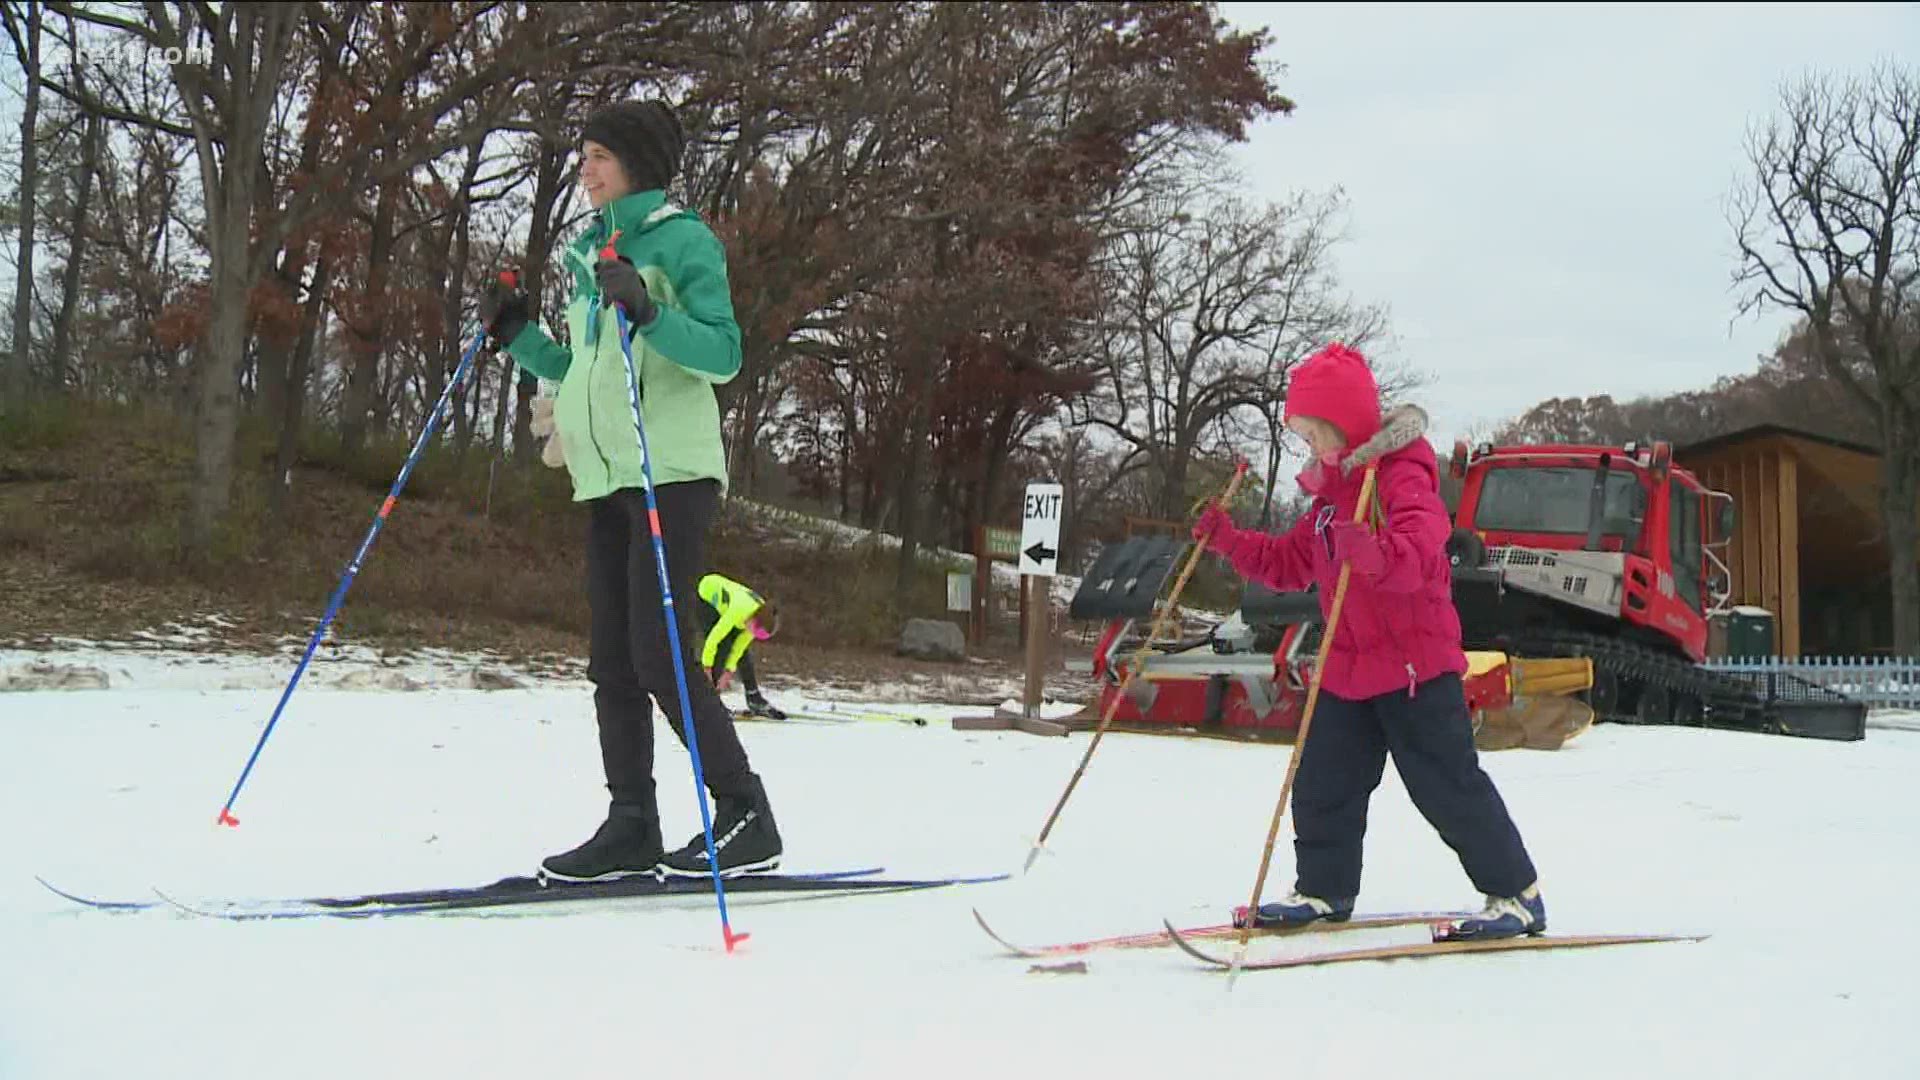 It's the earliest The Loppet Foundation has ever opened and it's likely the first place in the state to welcome skiers this year.